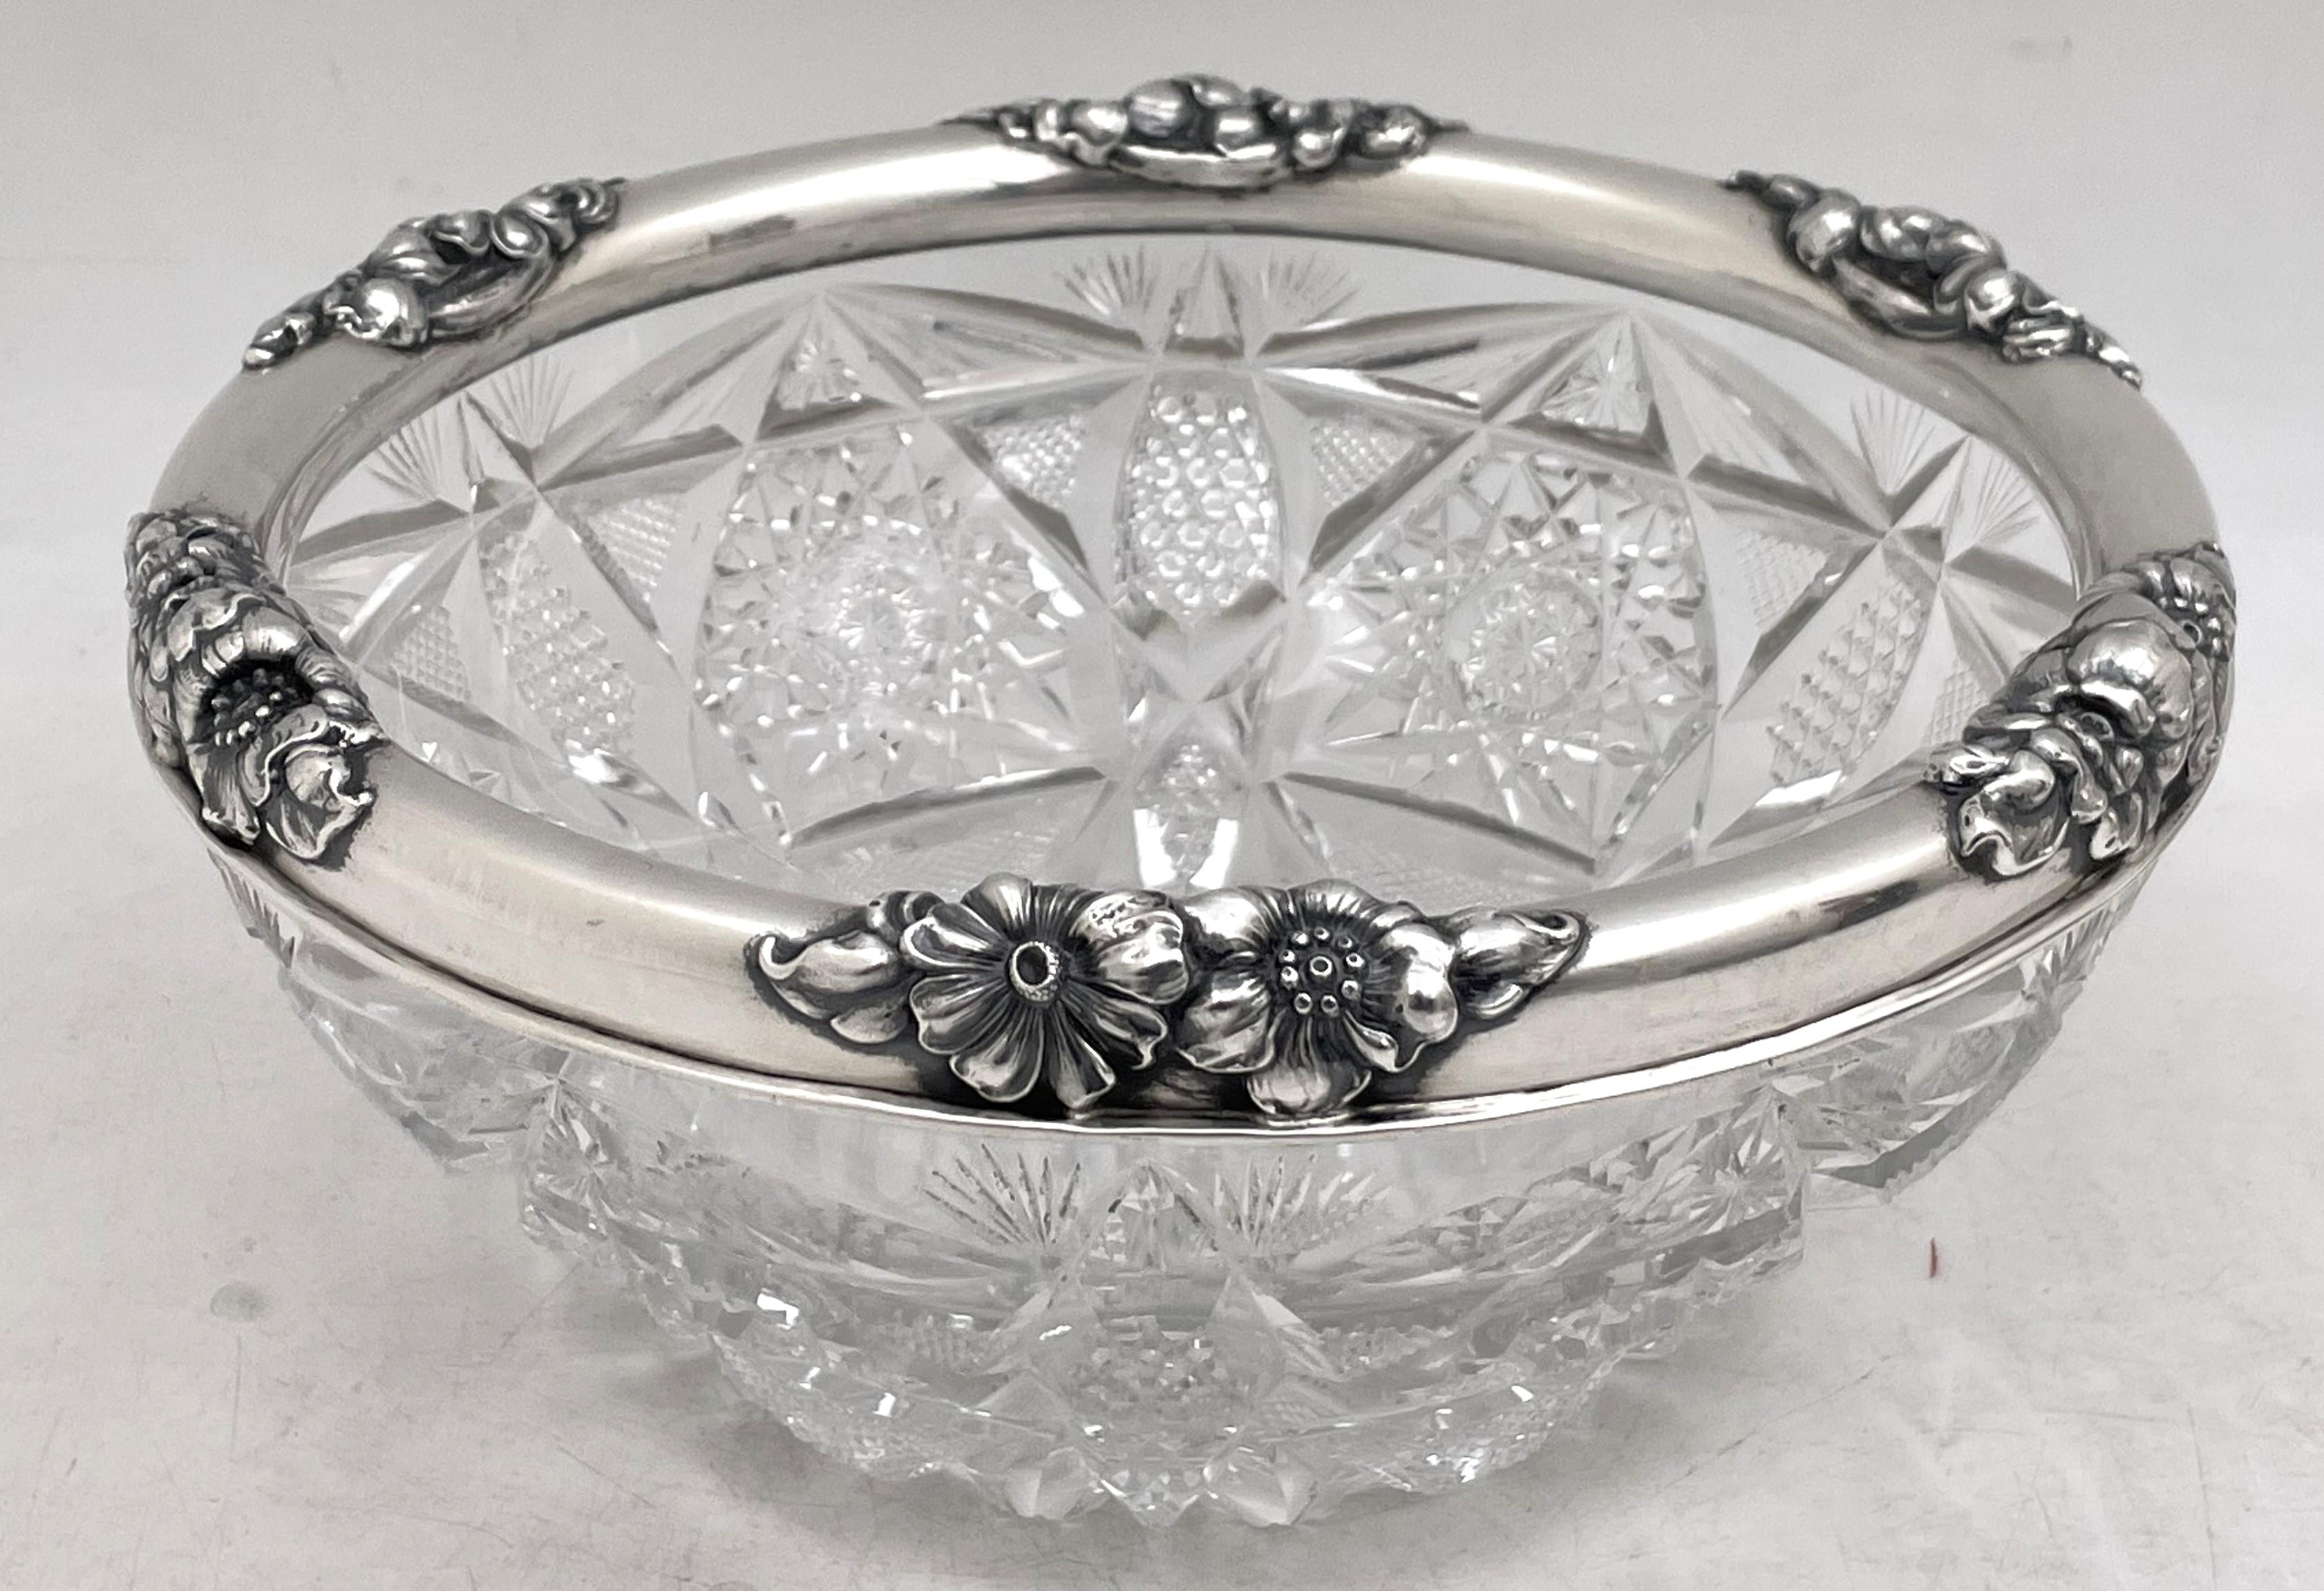 Gorham sterling silver and cut glass (in the diamond pattern) bowl from 1903 and in Art Nouveau style, the rim beautifully adorned with varied floral motifs. This exquisitely well-crafted bowl measures 8 1/3'' in diameter by 3 7/8'' in height and